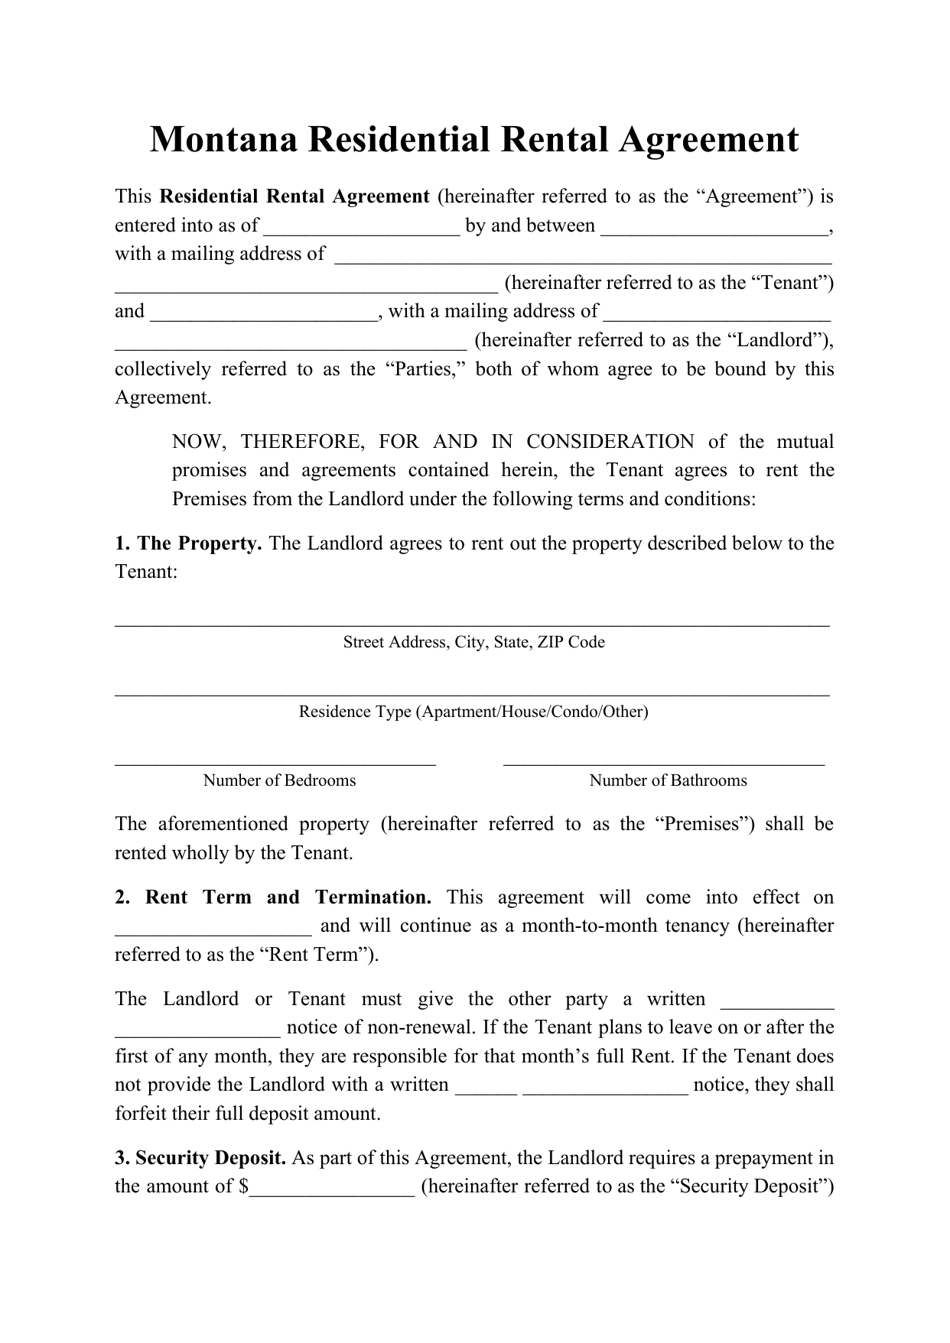 Residential Rental Agreement Template - Montana, Page 1